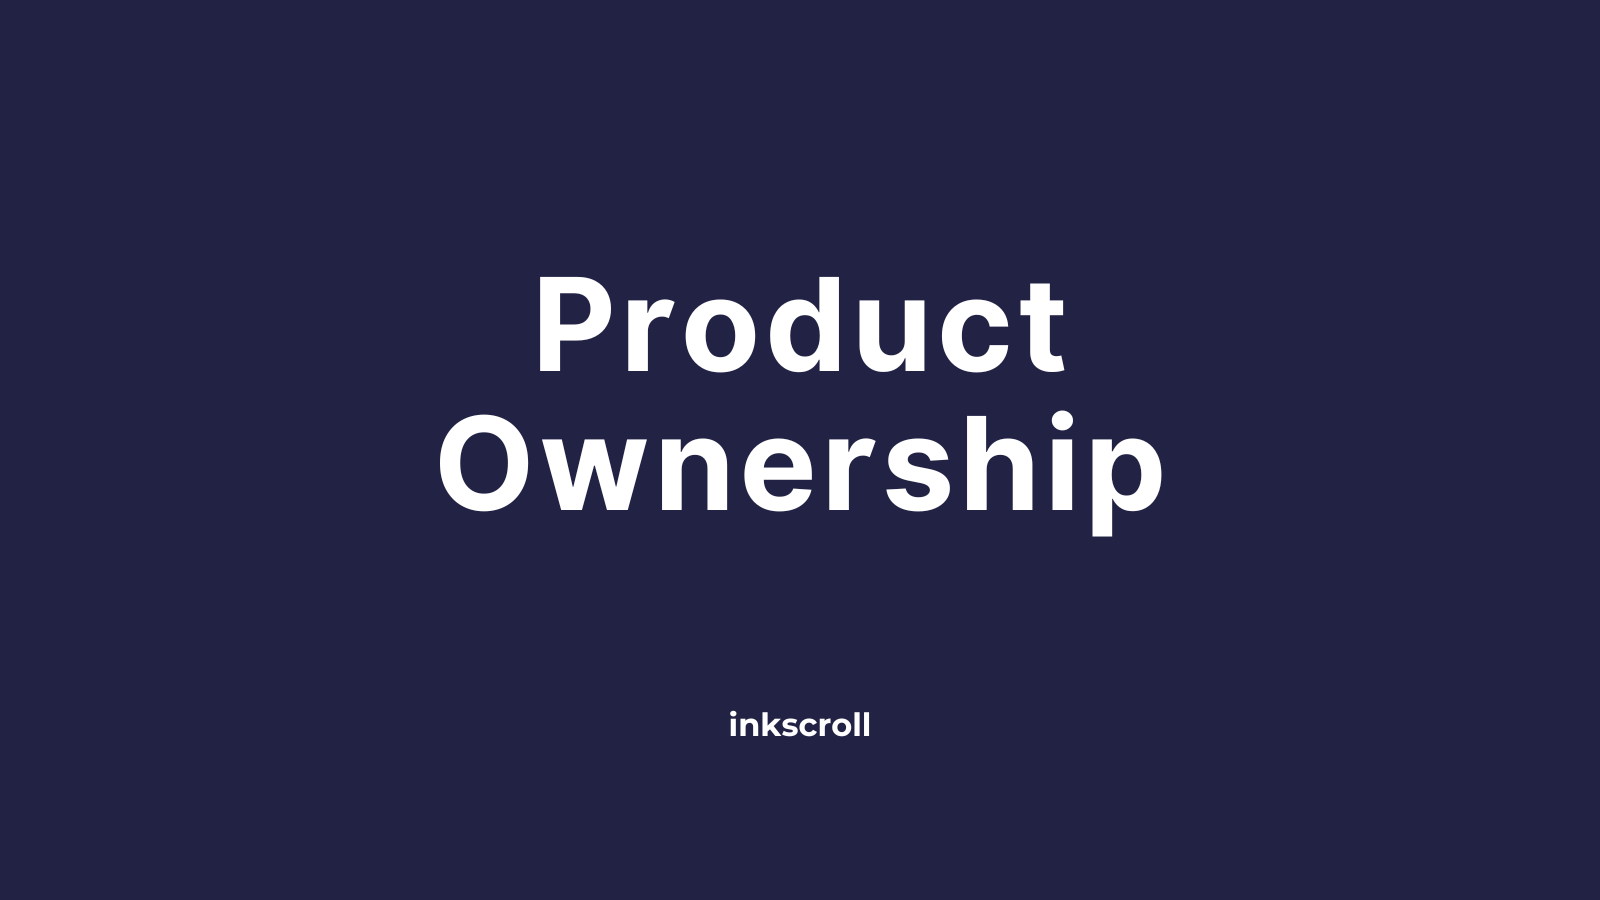 What does a Software Product Owner do?